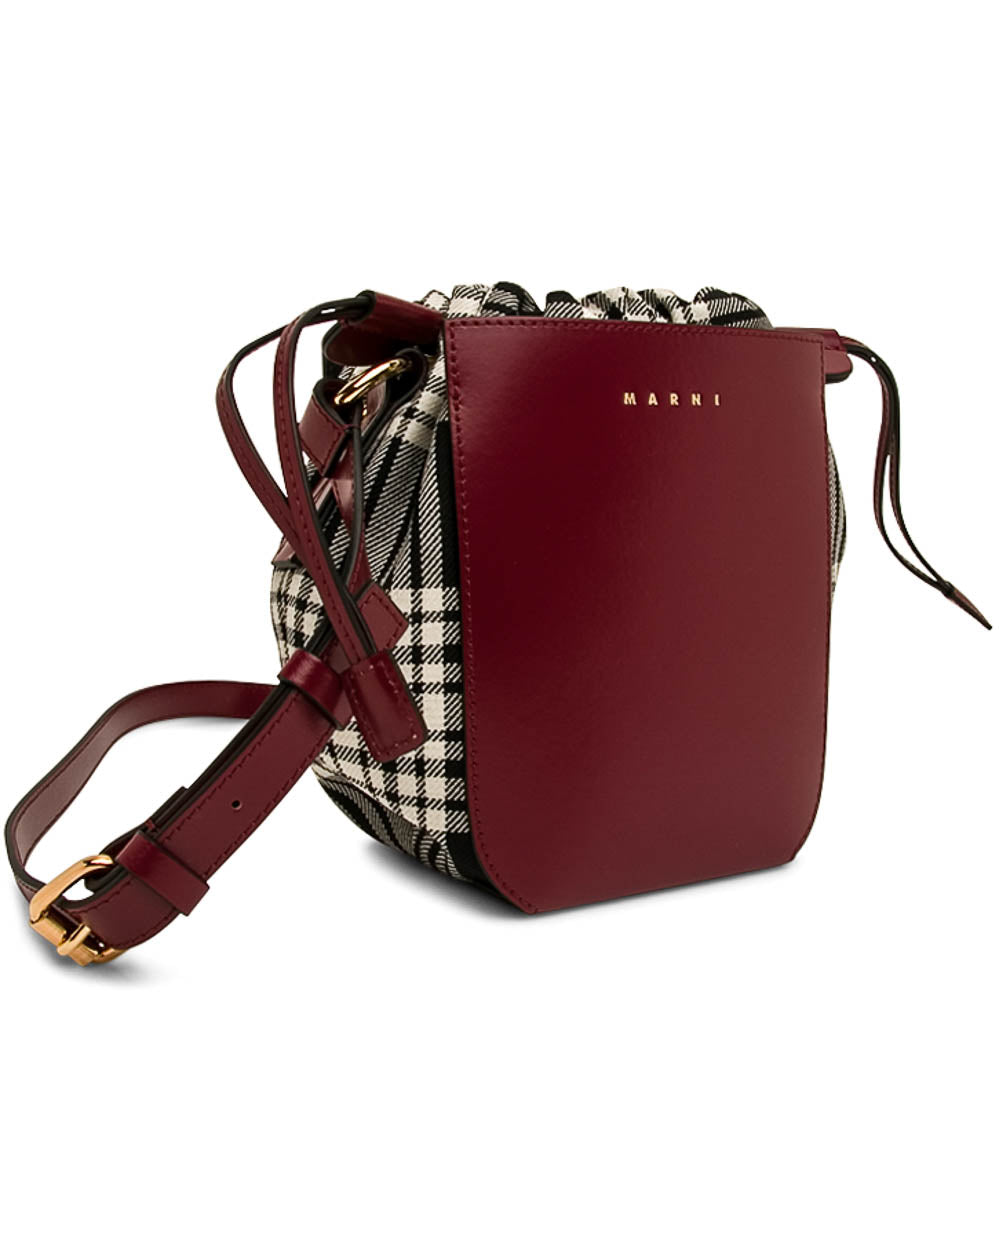 Gusset Bag in Cherry Plaid